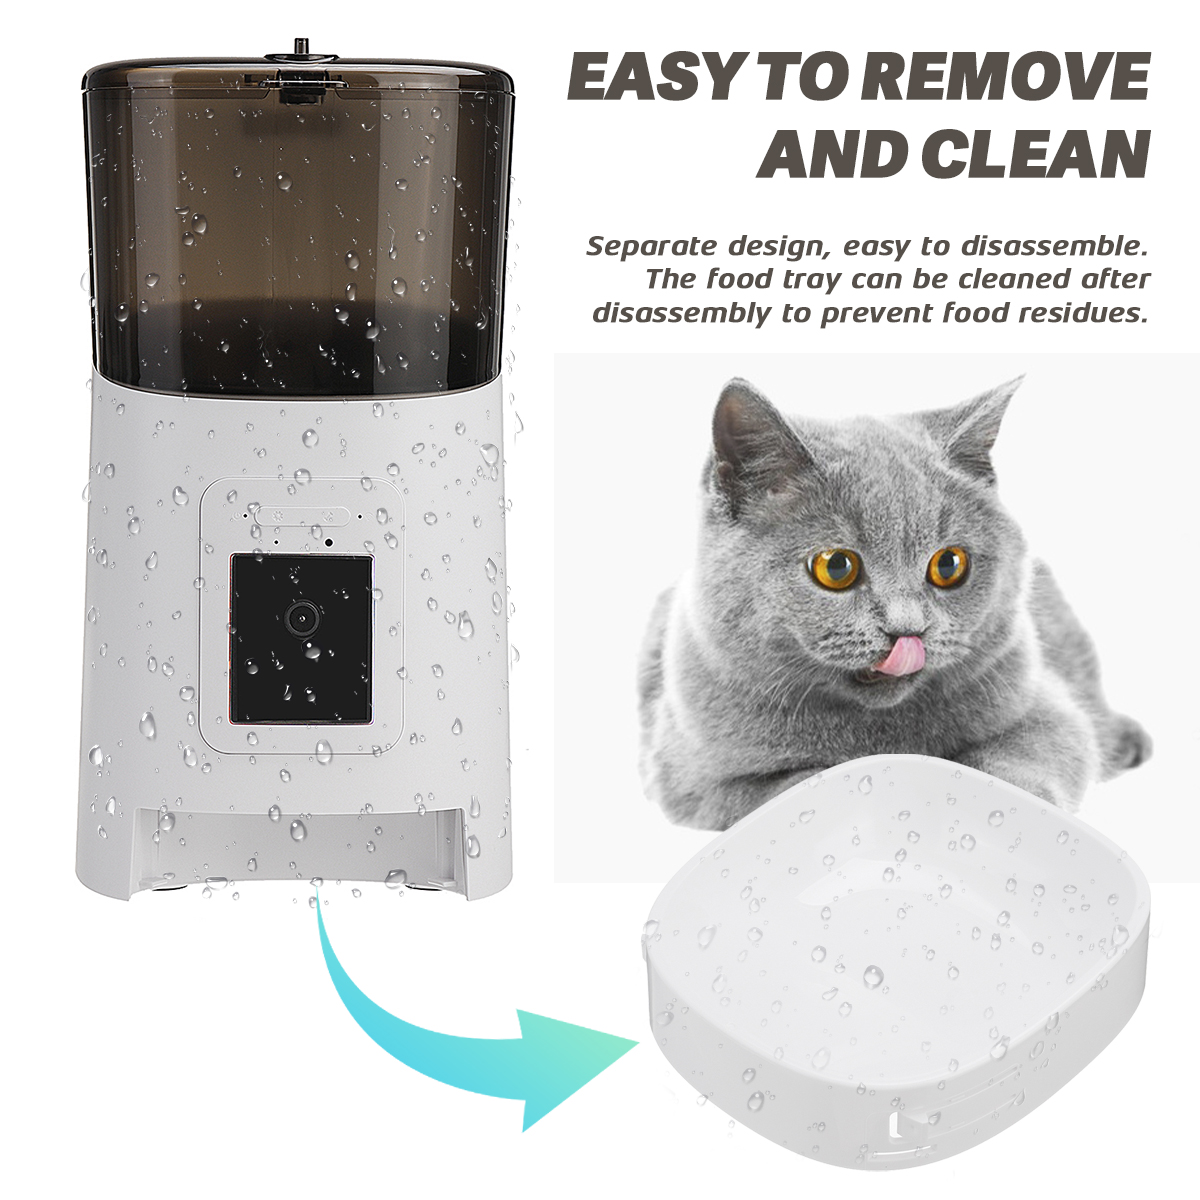 6L-Remote-Visibility-Pet-Feeder-Timing-Automatic-For-Cats-Dogs-WiFi-Intelligent-Swirl-Smart-Food-Dis-1957203-3